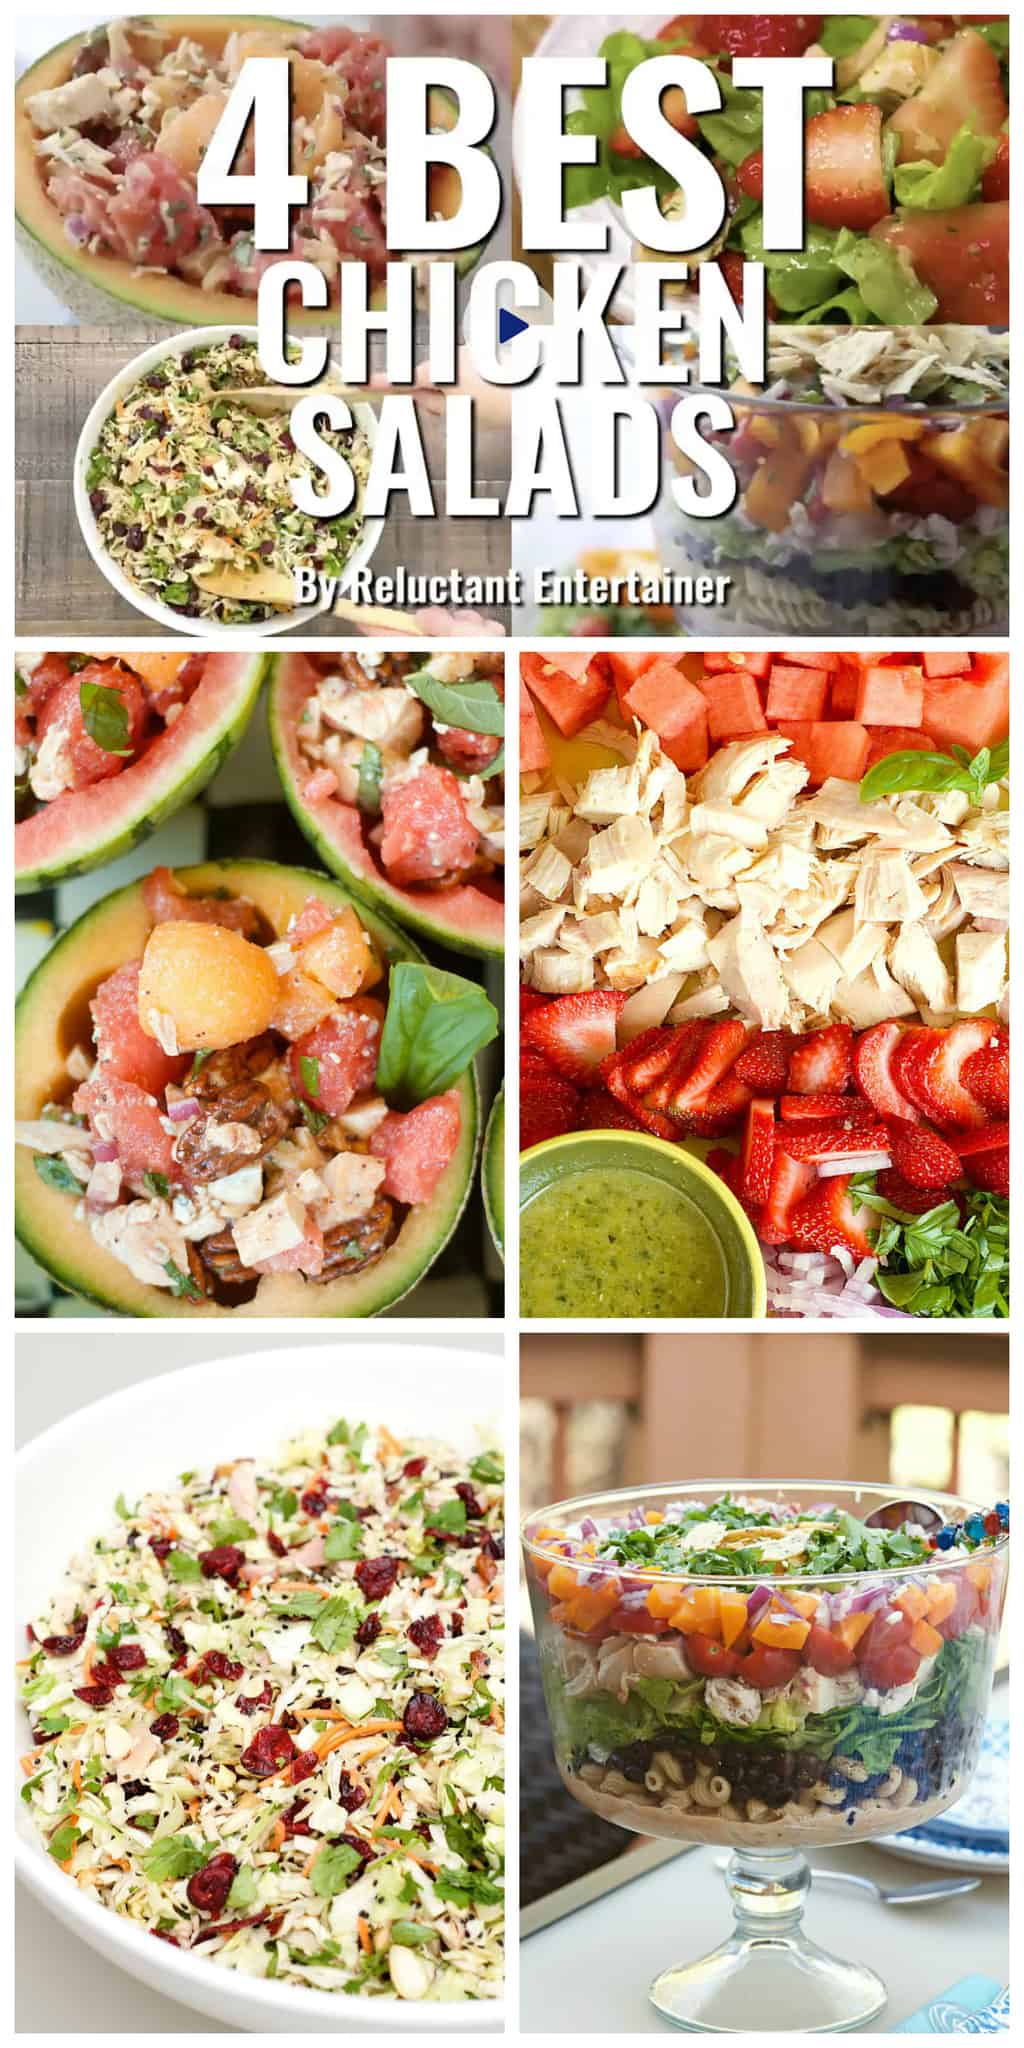 4 BEST Chicken Salad Recipes - Reluctant Entertainer